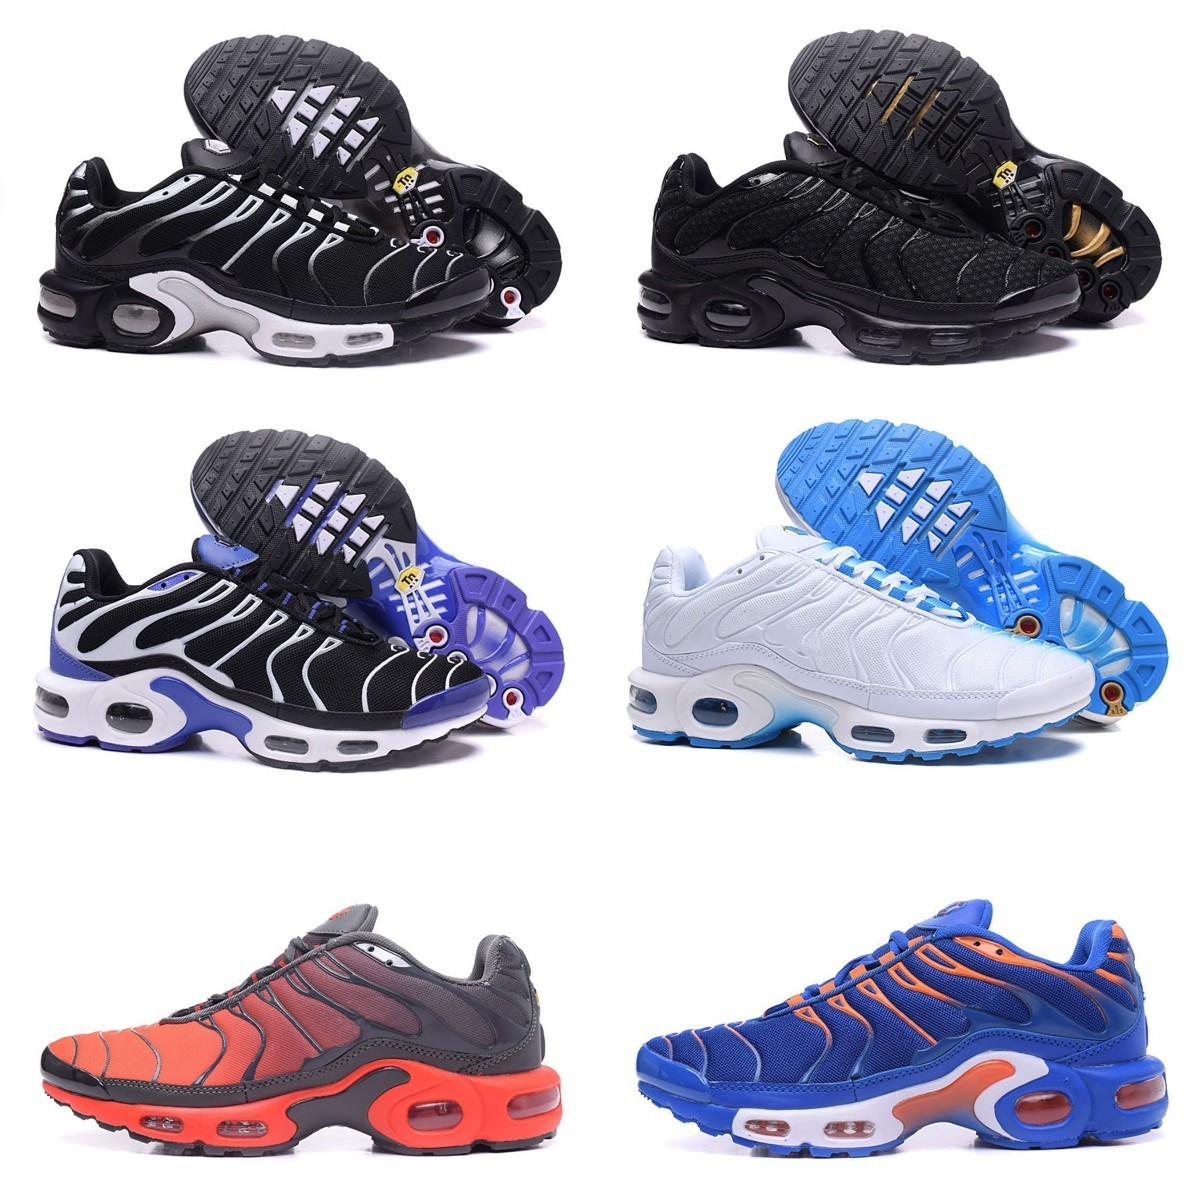 

Designer Mens Tn Running Shoes Tns OG Triple Black White Be True Max Plus Ultra Seafoam Grey Frost Pink Teal Volt Blue Crinkled Metal Unite Camo Requin Trainer Sneakers, Please contact us